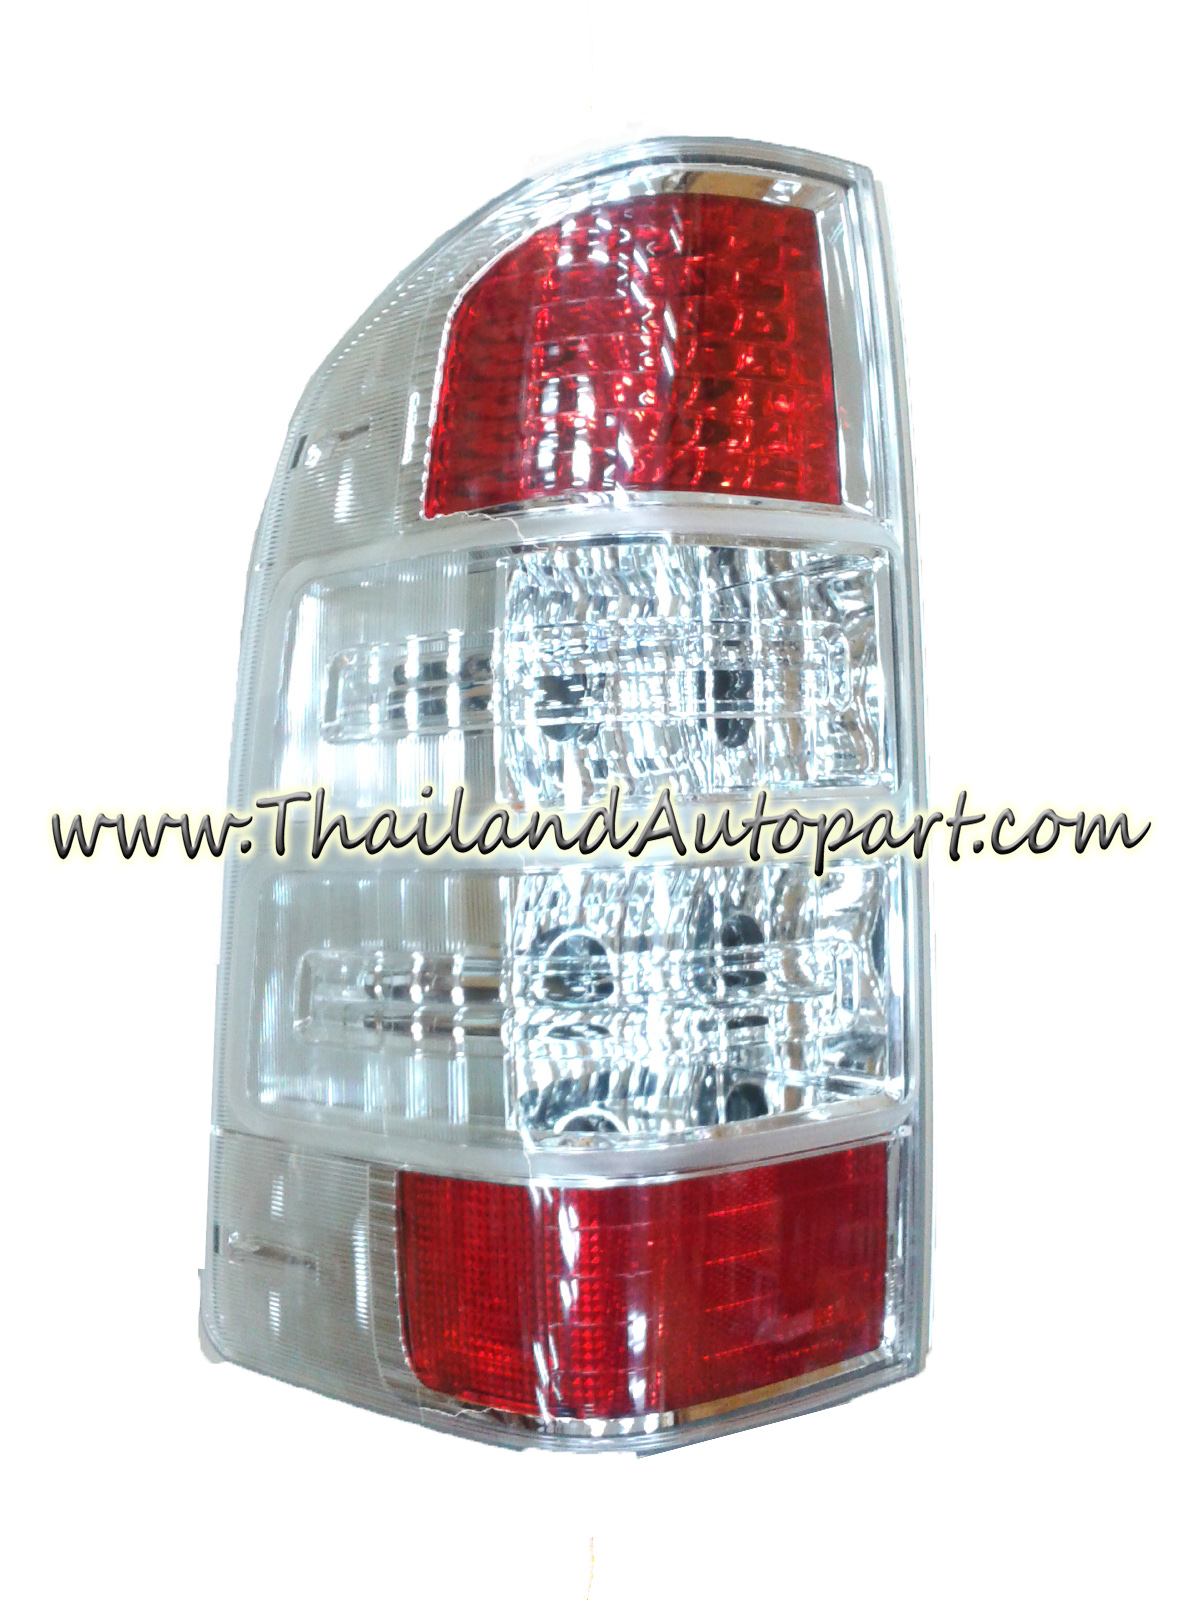 BACK LAMP FOR FORD DURATORQ